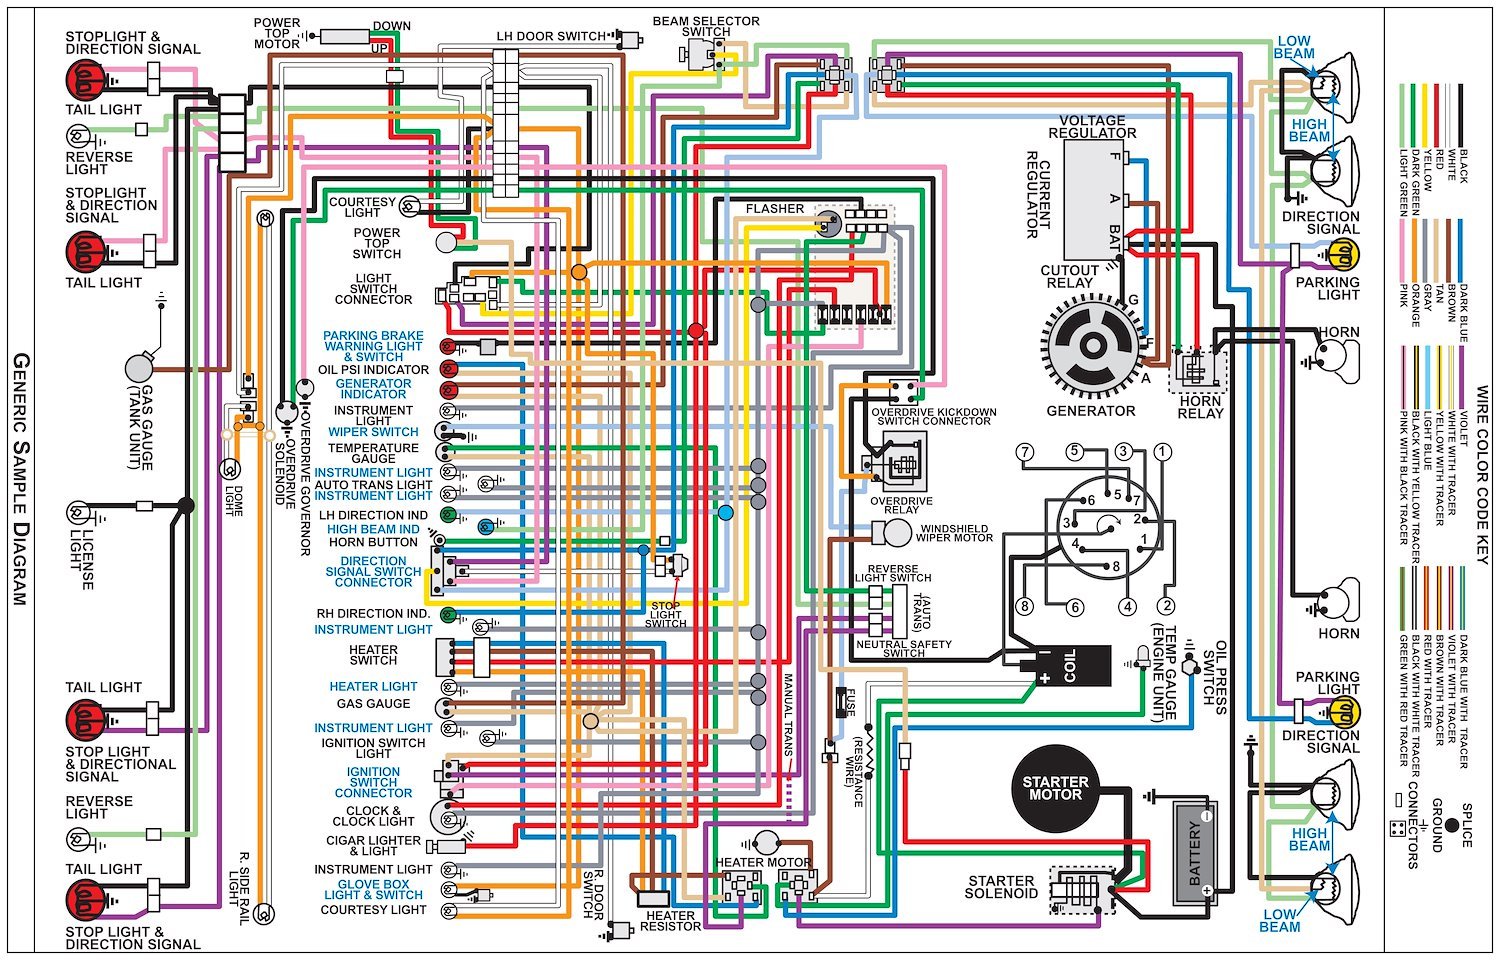 Wiring Diagram for 1966 Ford F-Series Truck, 11 in x 17 in., Laminated